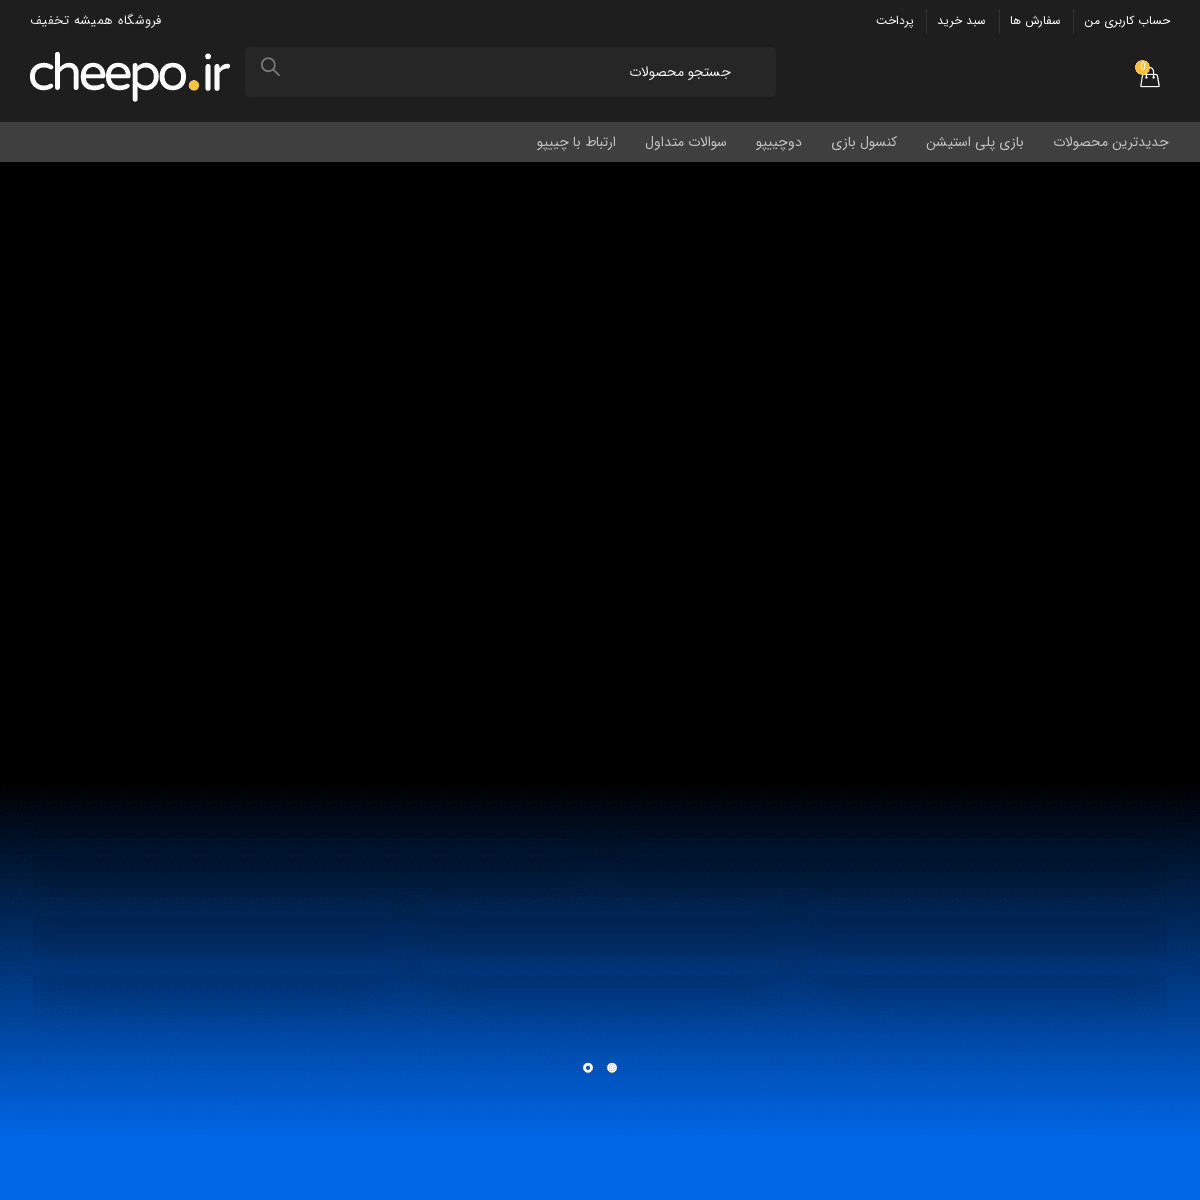 A complete backup of cheepo.ir